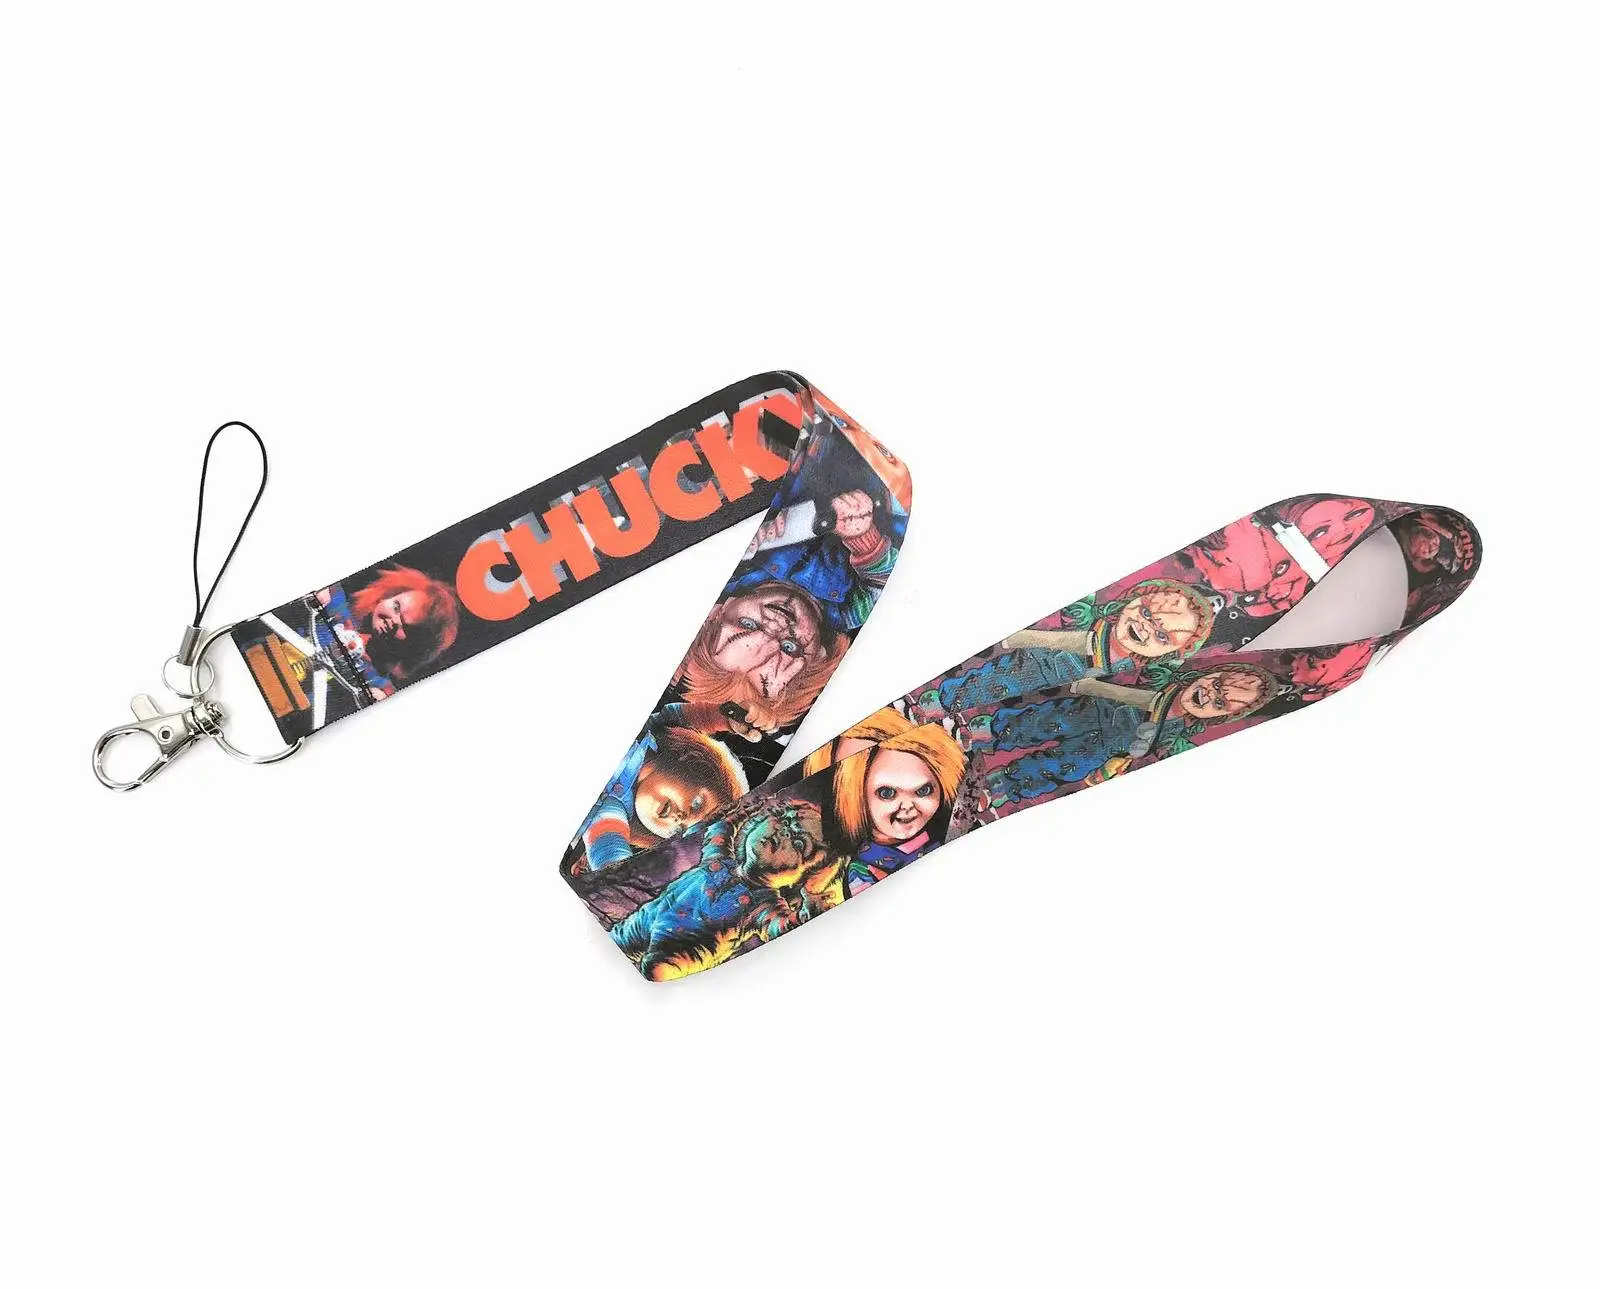 Wholesale Cartoon CHUCKY Key Lanyard ID Badge Holders Animal Phone Neck Straps with Keyring Phone Accessories D120